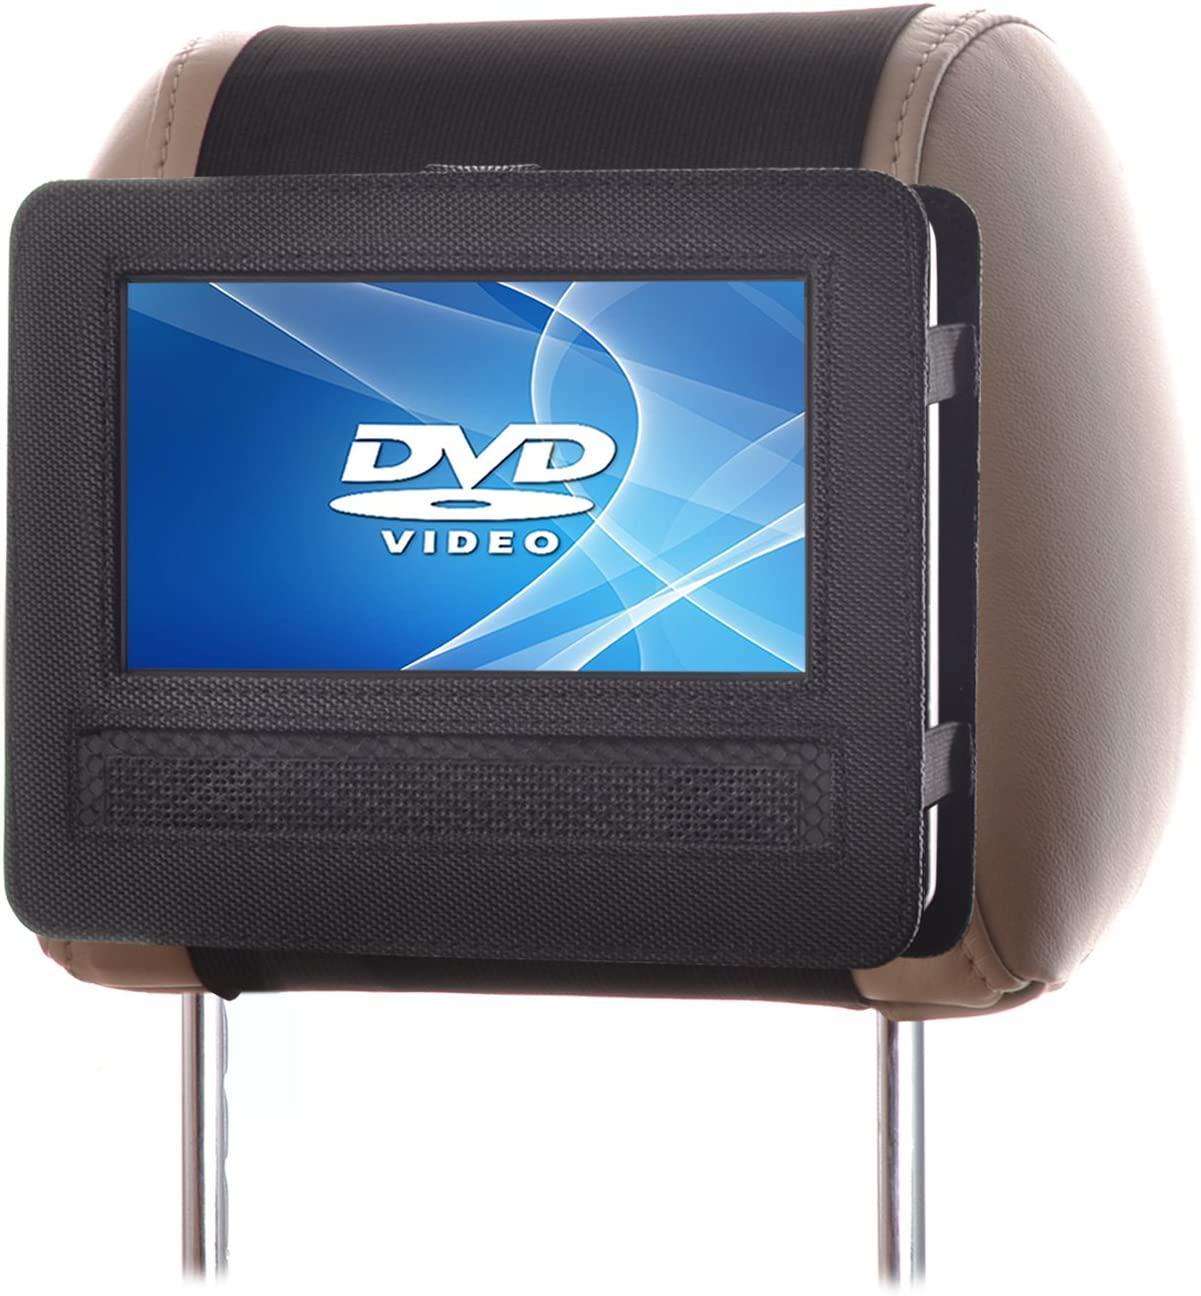 TFY, TFY Car Headrest Mount for Swivel and Flip Style Portable DVD Player-18cm